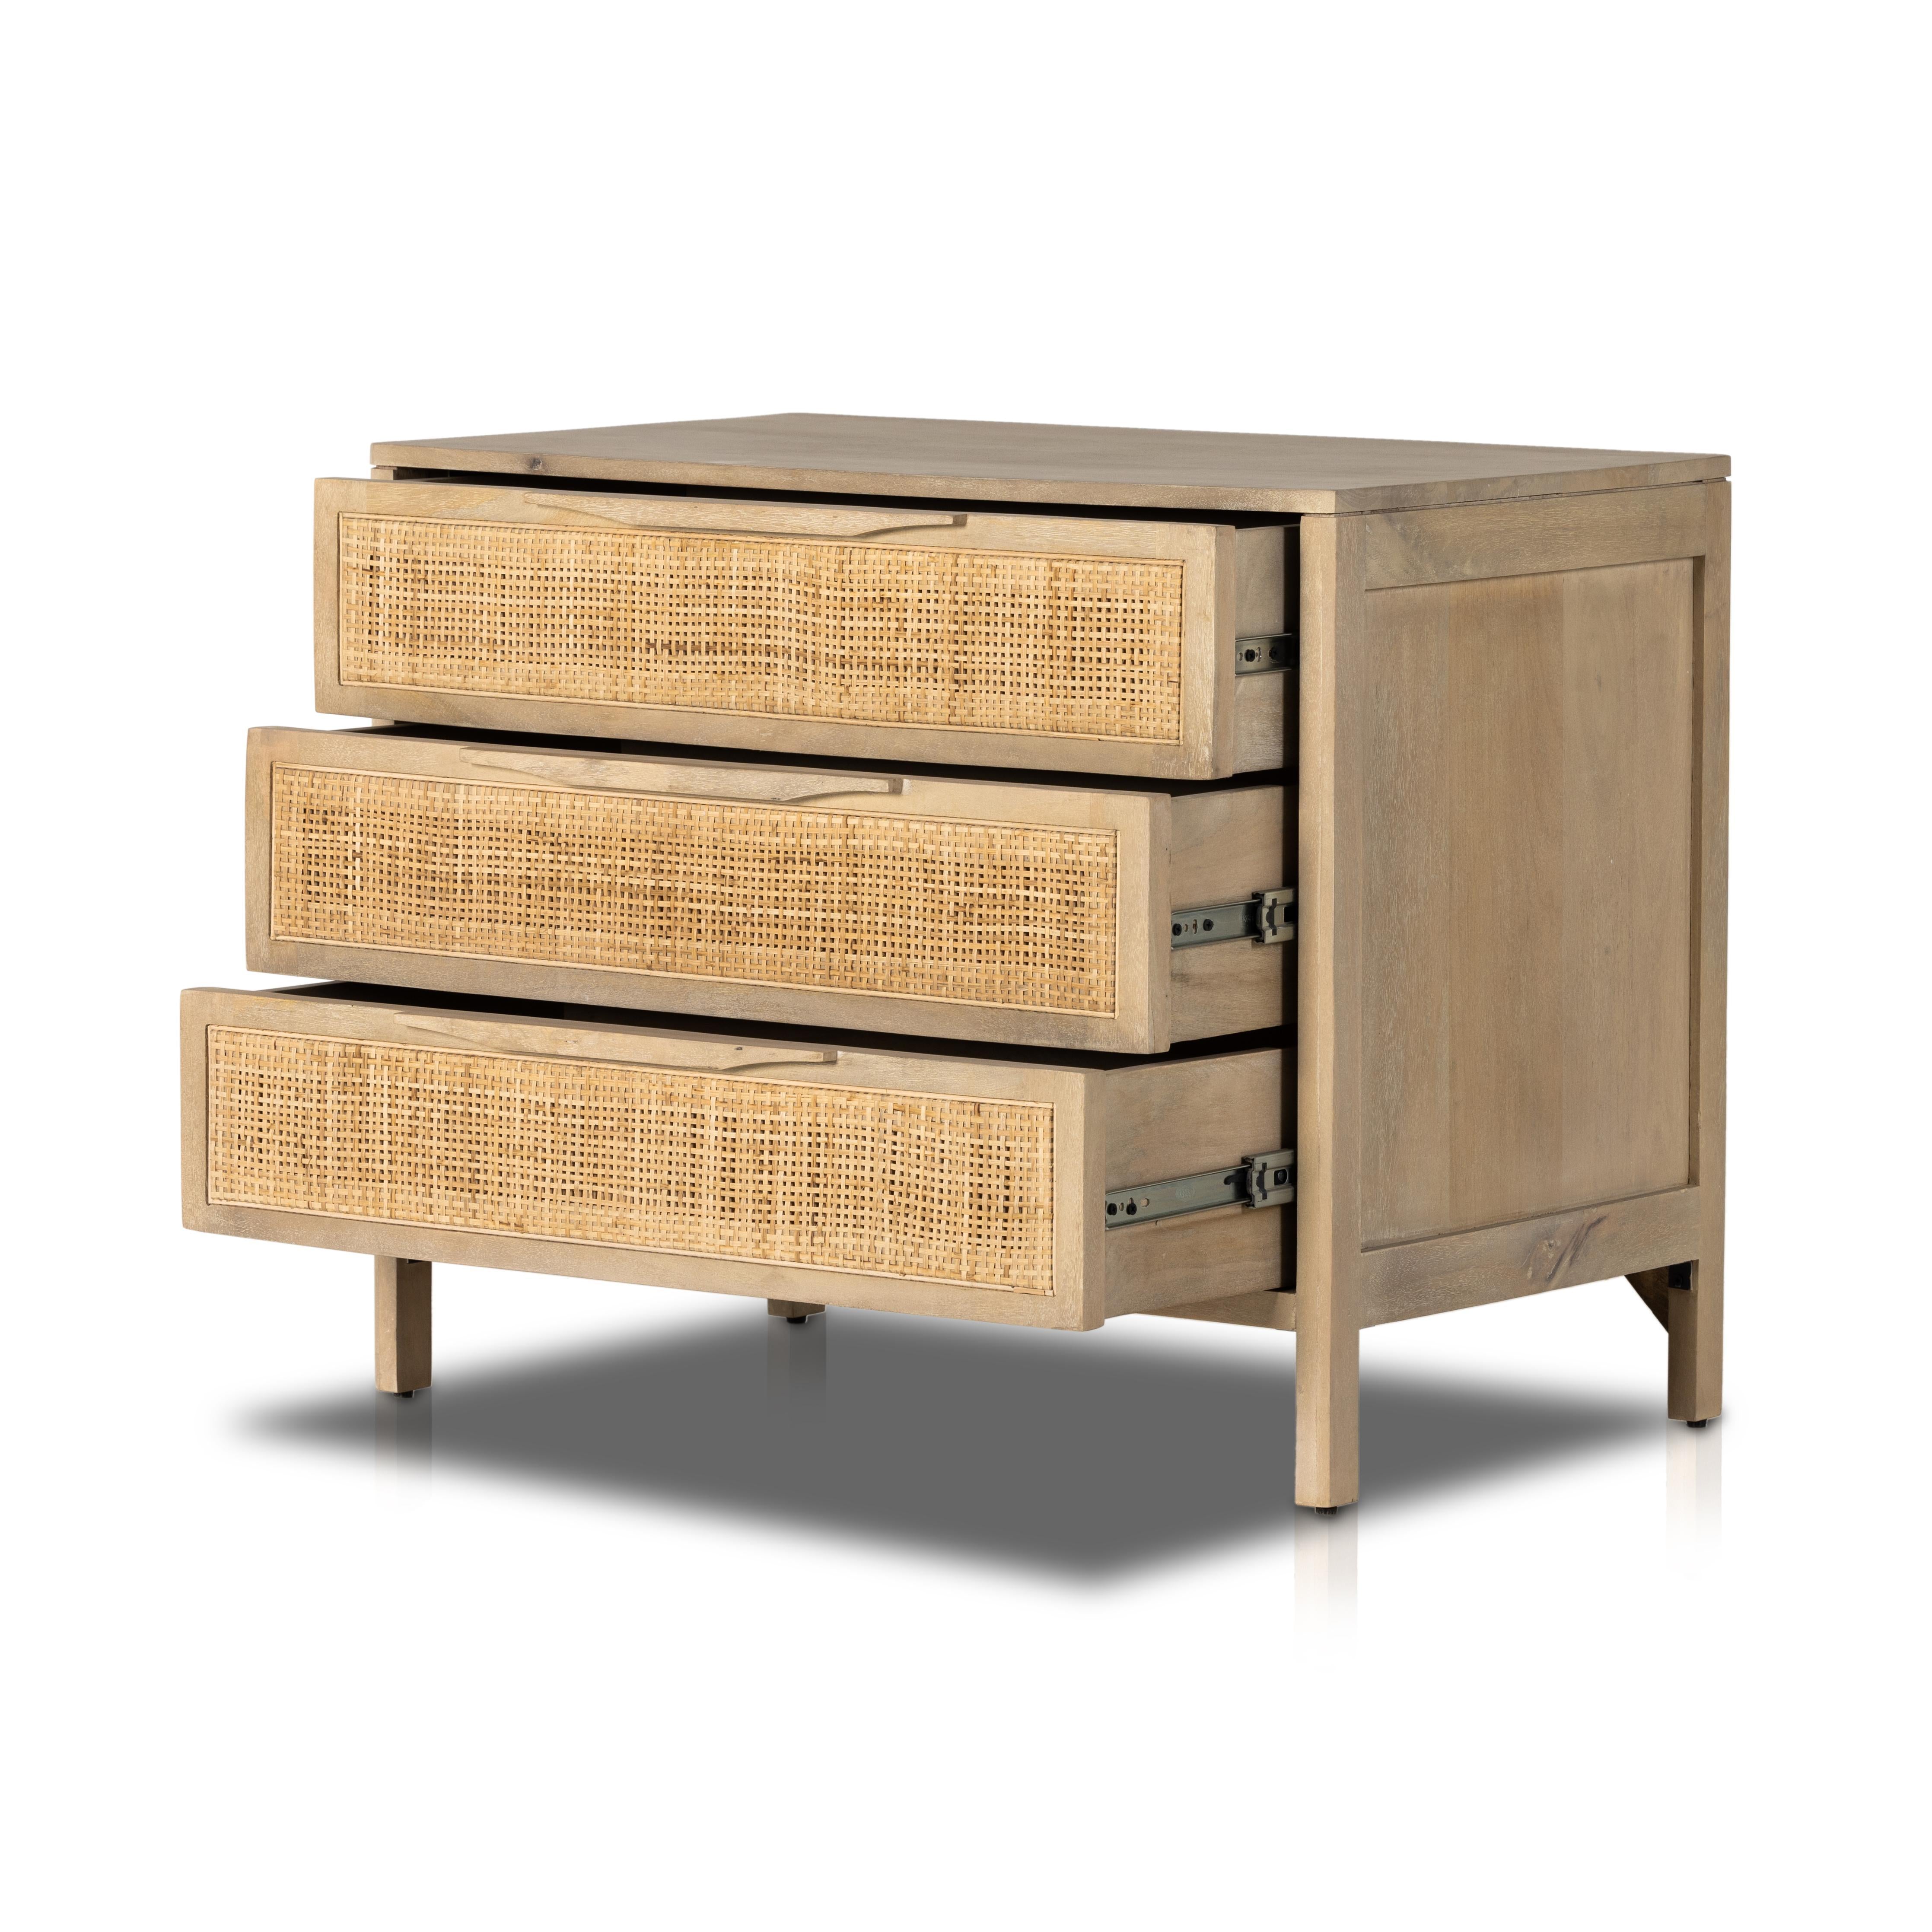 Natural mango frames inset woven cane, for a light, textural look with organic allure. Three spacious drawers provide plenty of closed storage. Amethyst Home provides interior design, new home construction design consulting, vintage area rugs, and lighting in the Calabasas metro area.